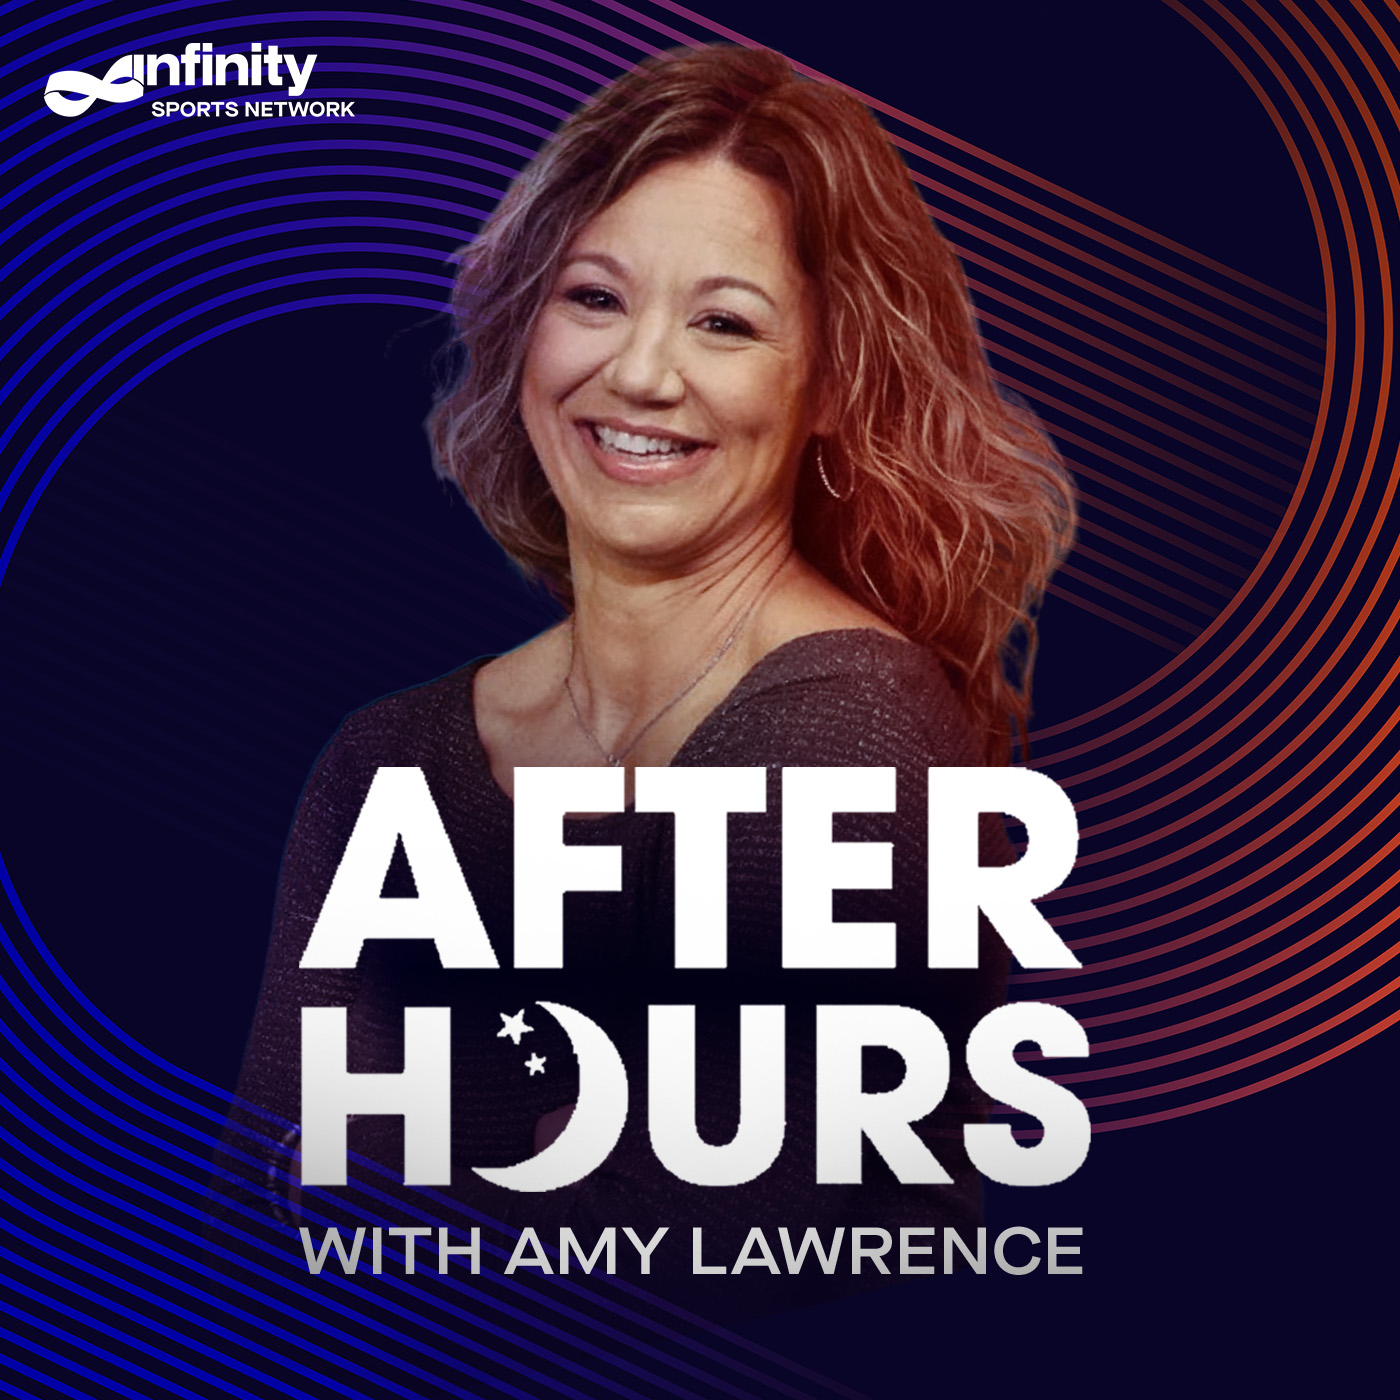 8-26-21 After Hours with Amy Lawrence PODCAST: Hour 2